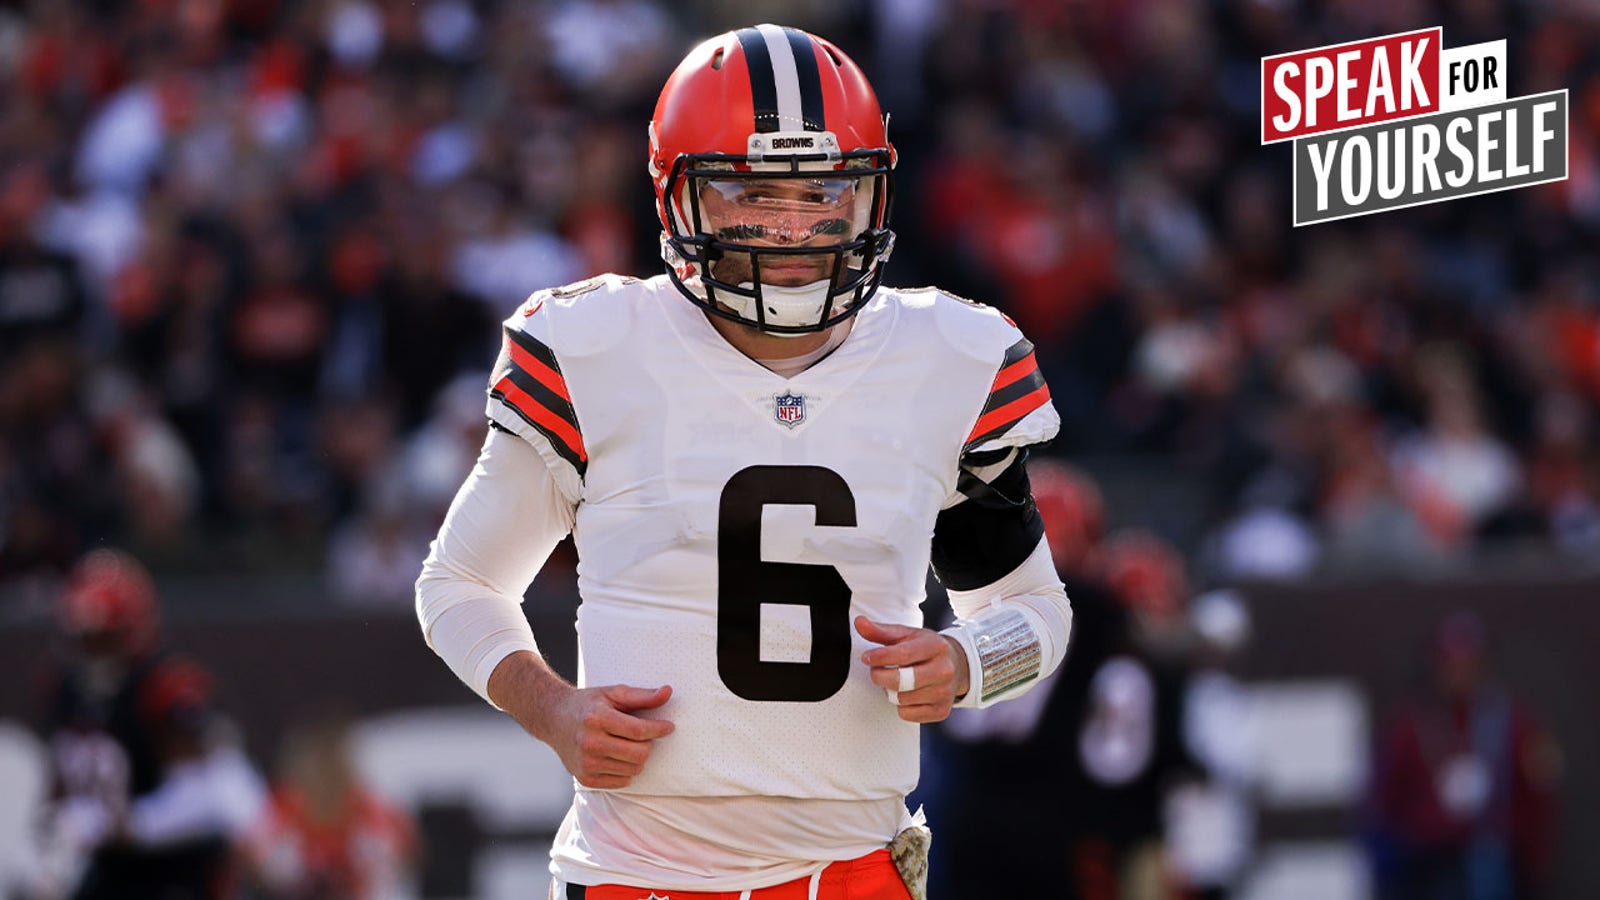 Marcellus Wiley on Browns' win: Baker Mayfield's success with less talent is an indictment on him I SPEAK FOR YOURSELF